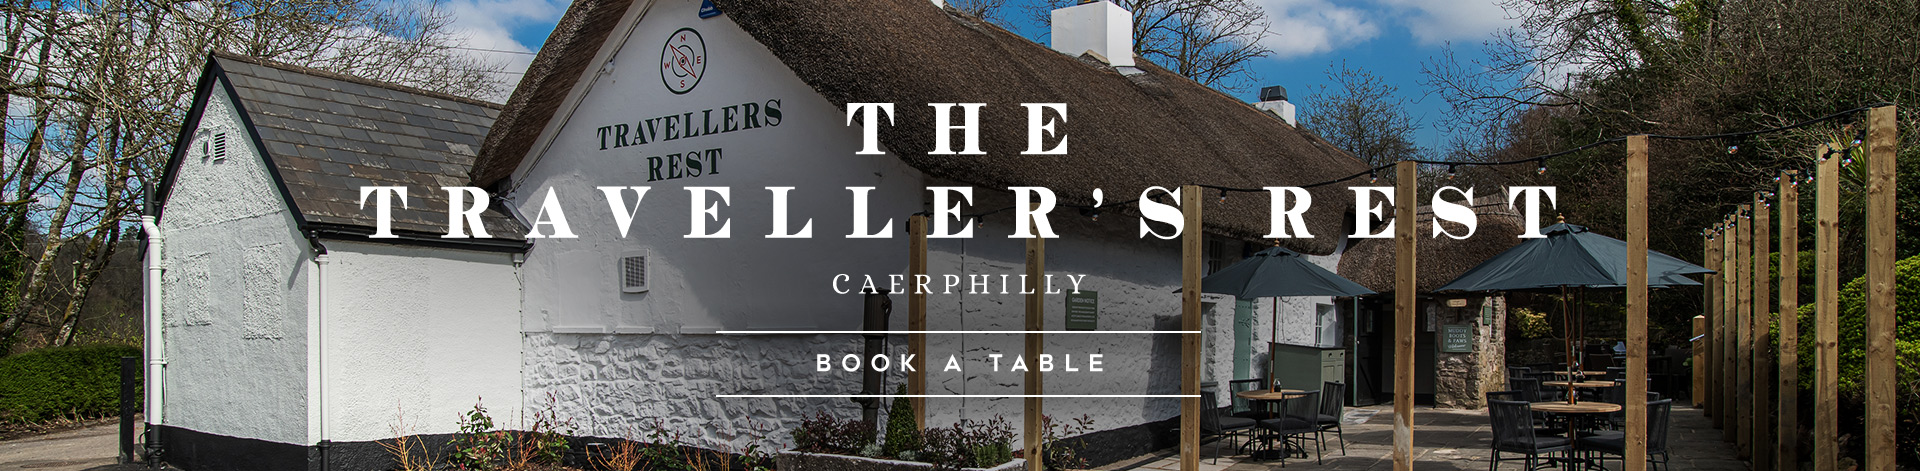 The Traveller's Rest, Caerphilly